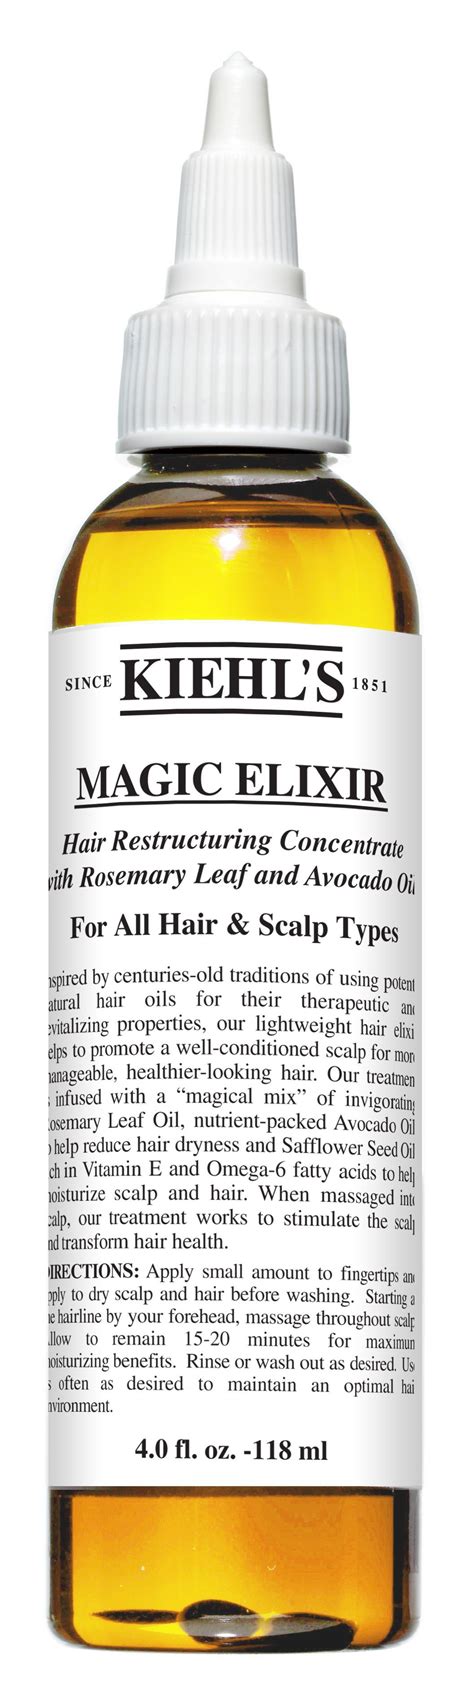 How to Use Kiehl's Magic Elixir for Different Hair Types and Concerns